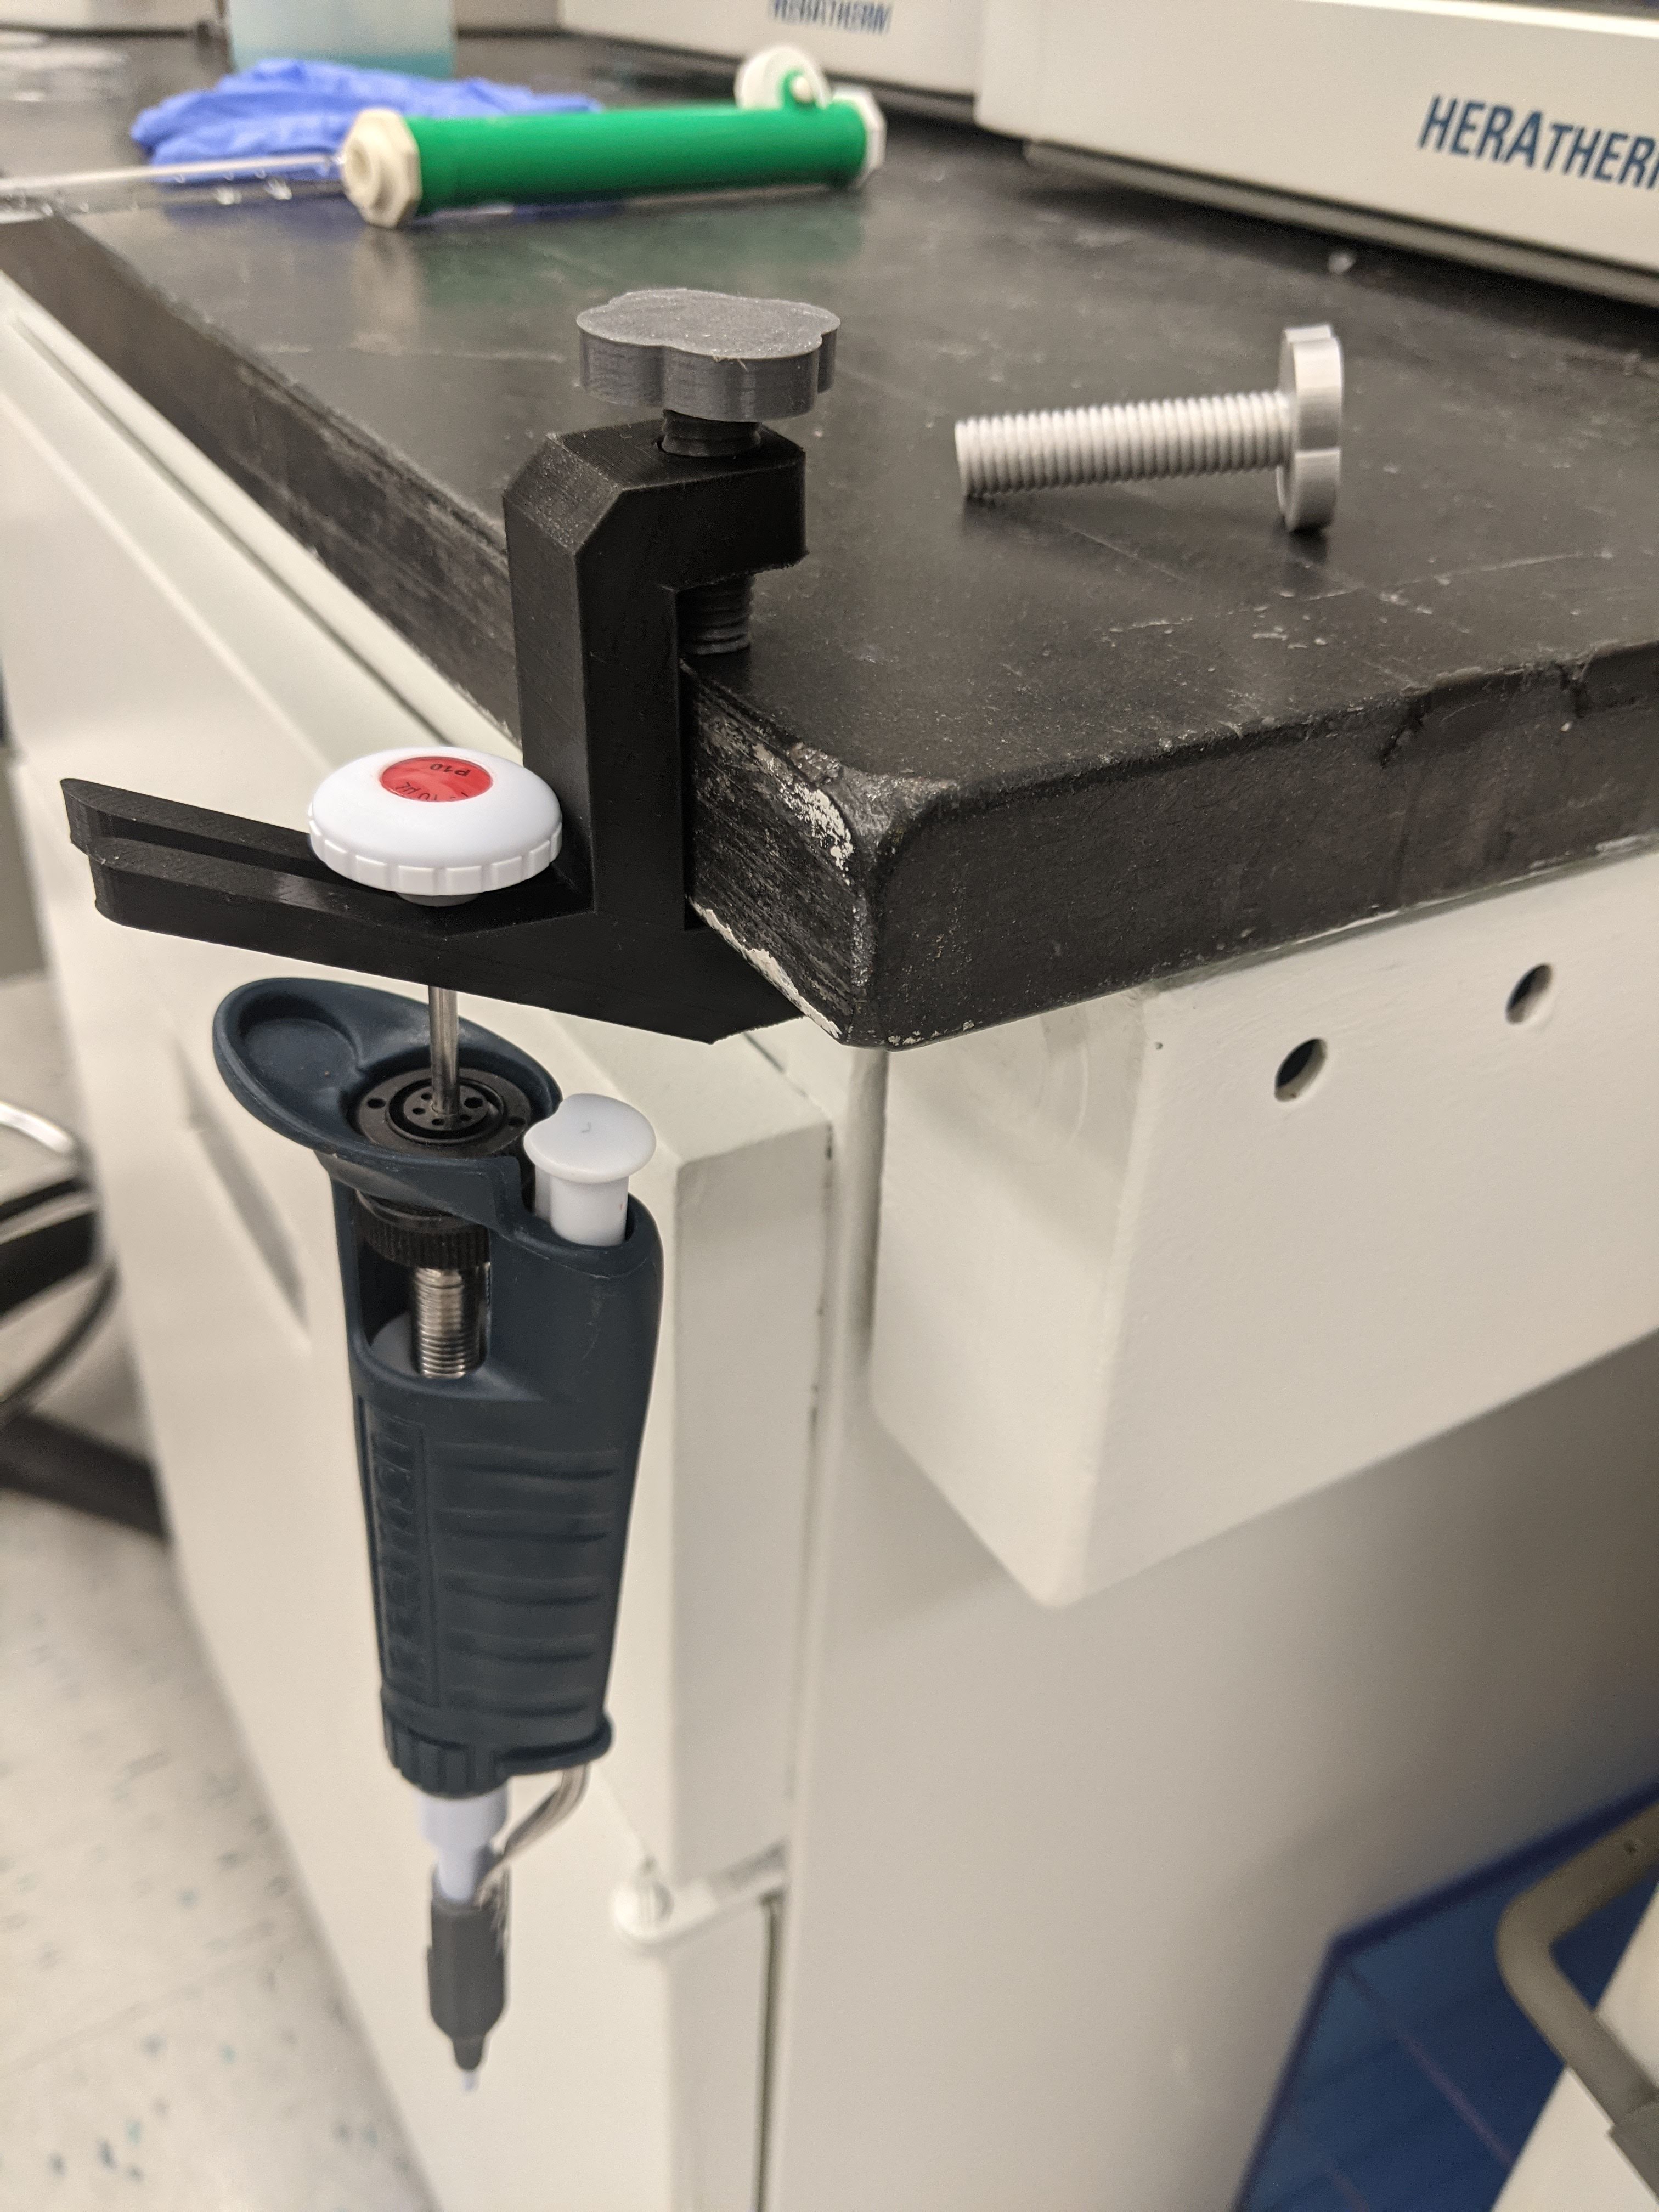 The pipette holder with the adjustable screw